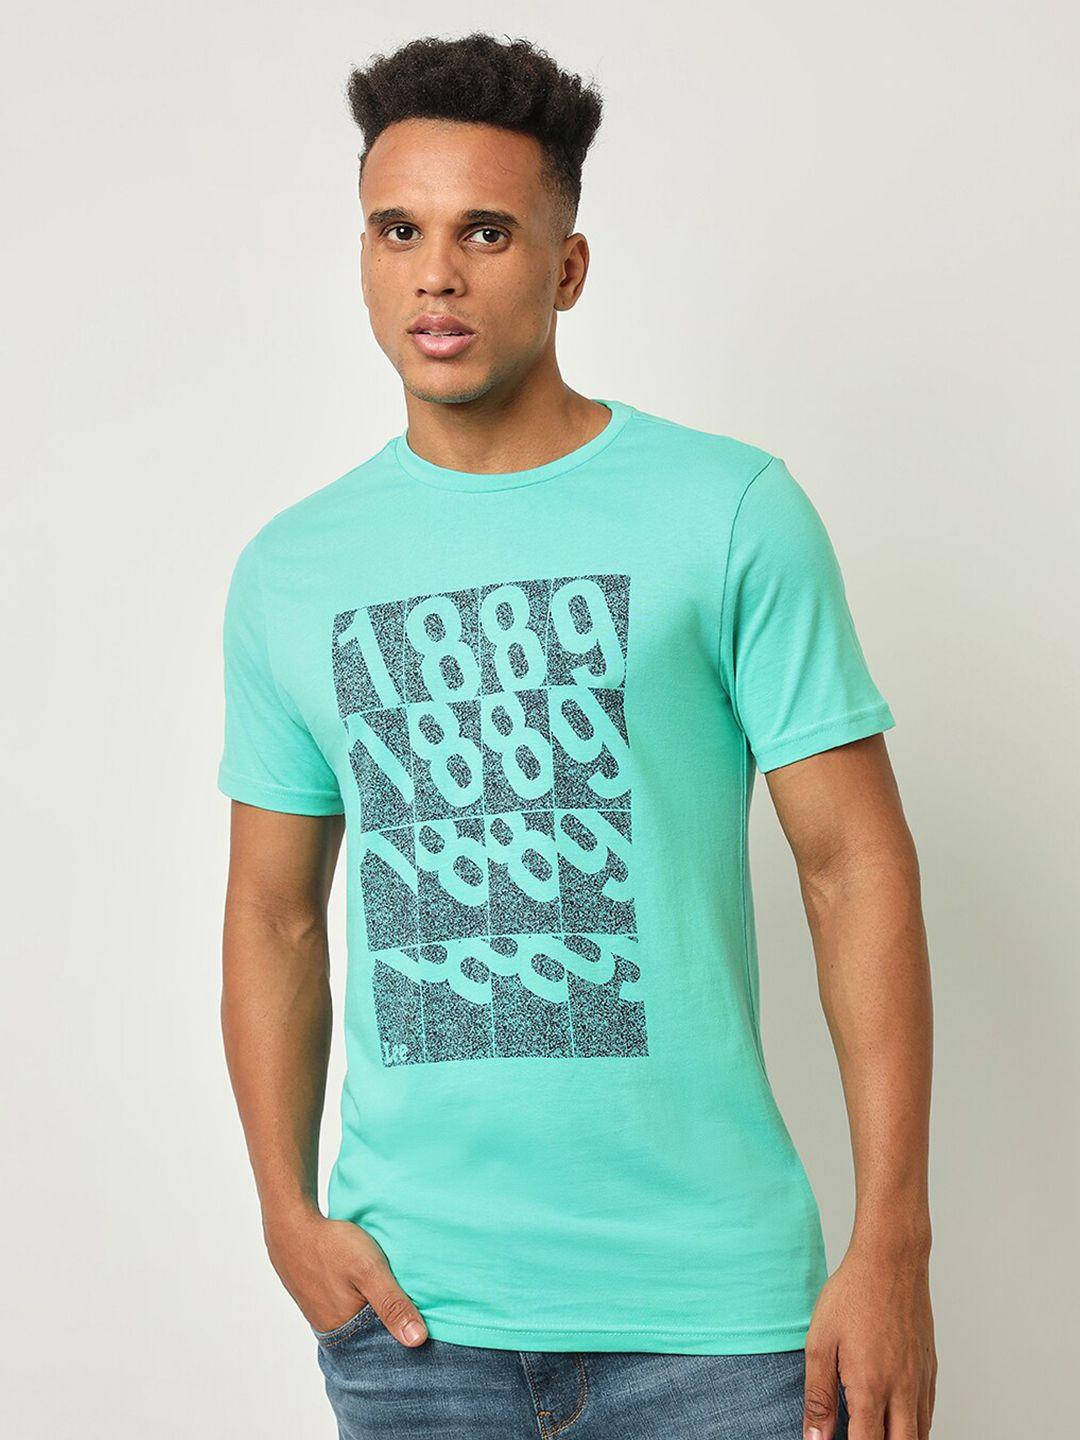 lee-typography-printed-slim-fit-cotton-t-shirt